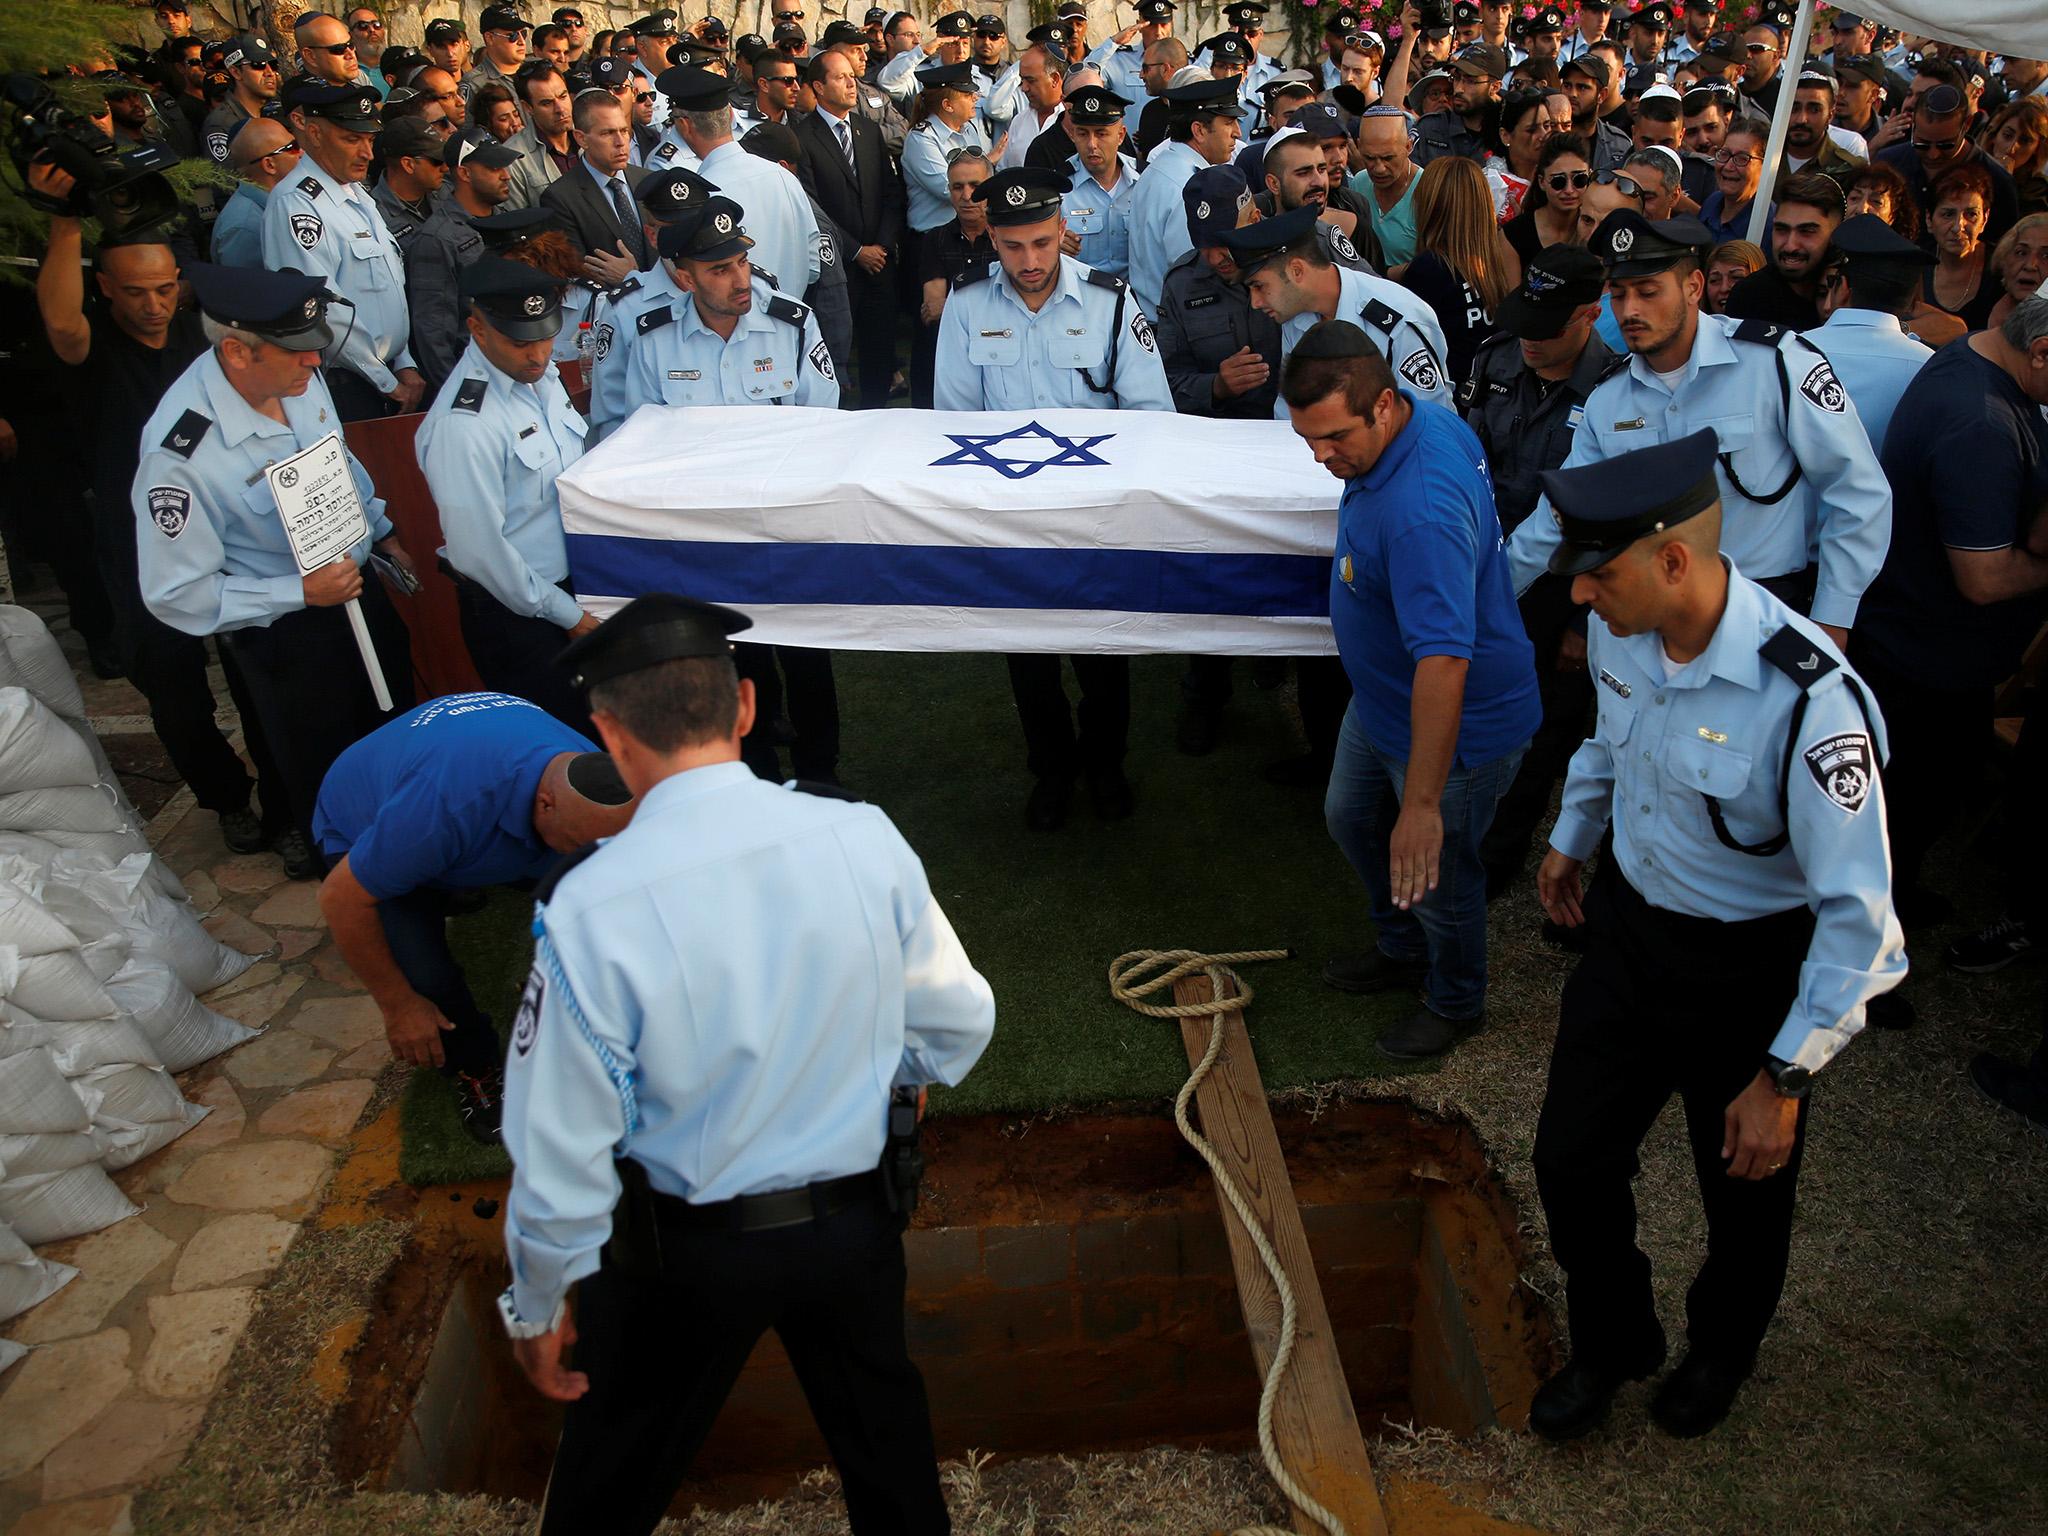 Israeli policeman Yosef Kirma was given a public funeral after being killed by a Palestinian assailant who fired from a car in East Jerusalem, leaving two dead and five injured